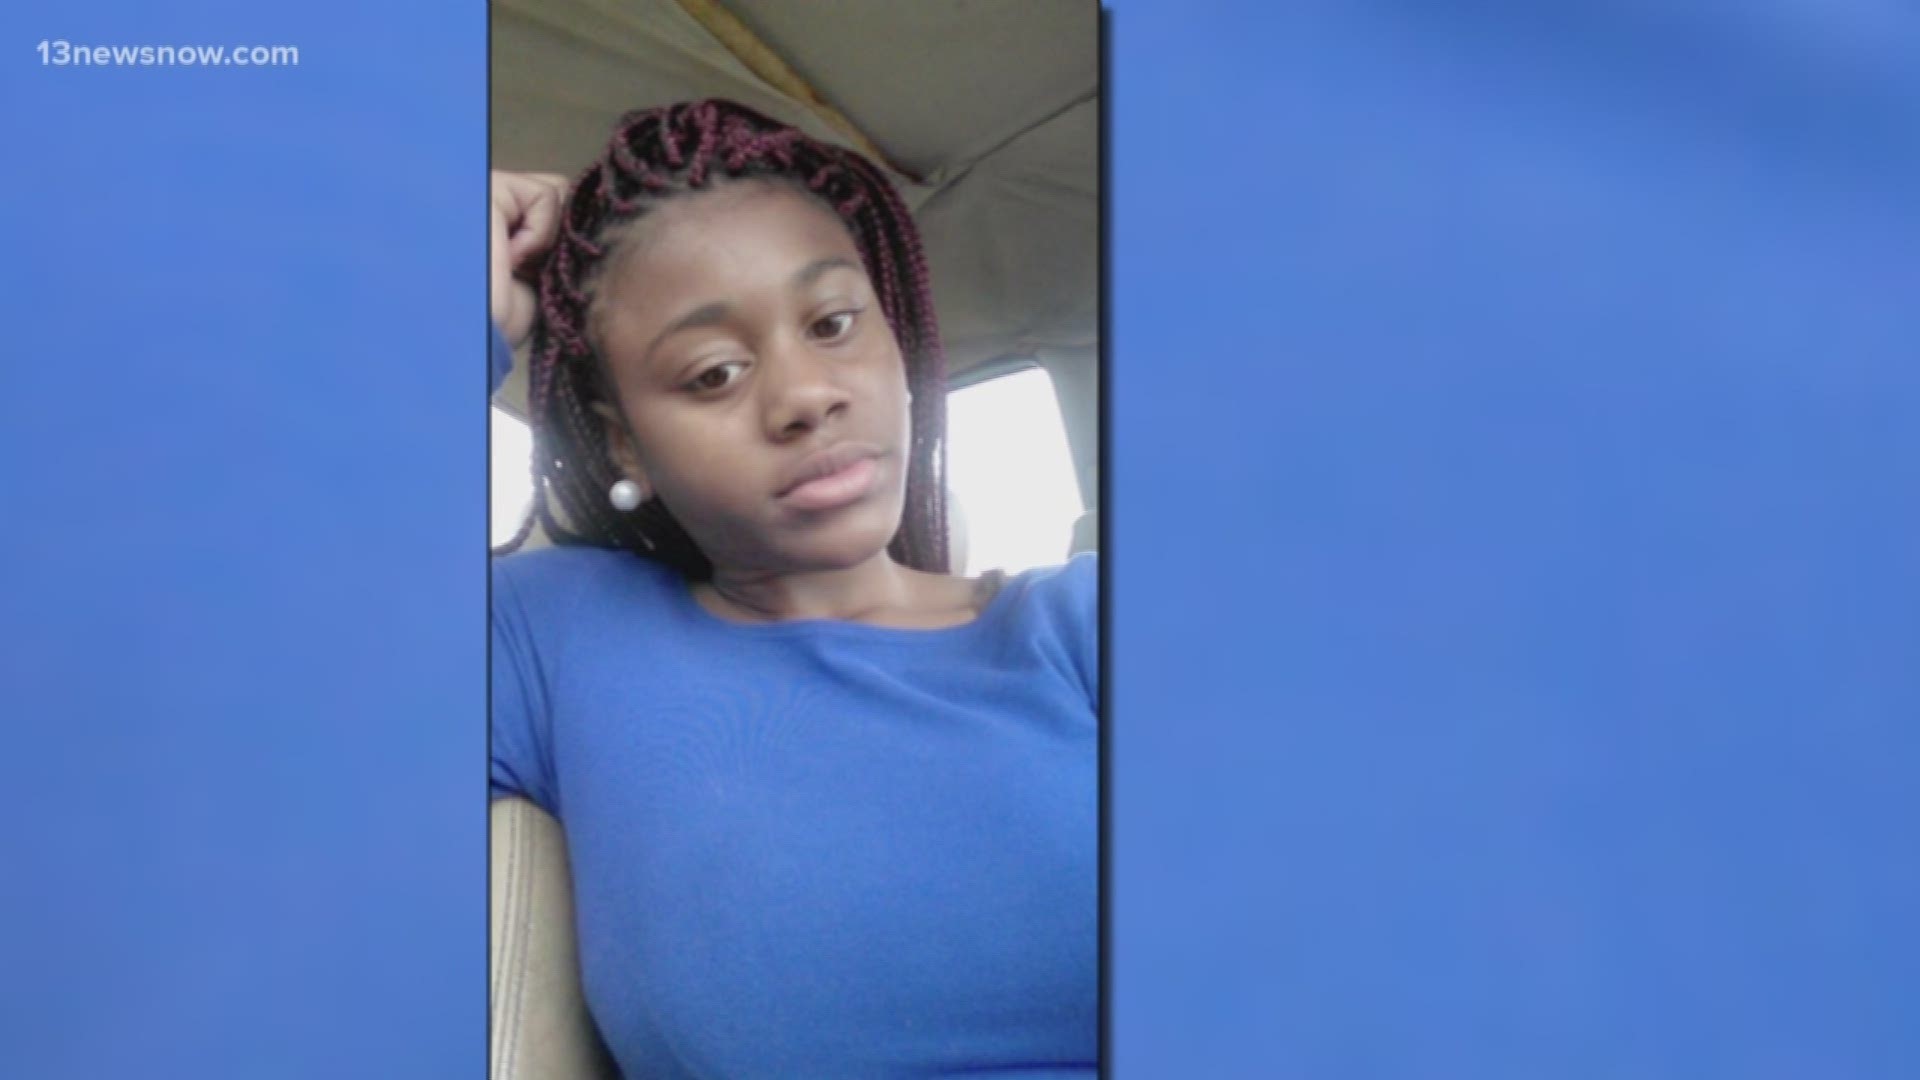 A vigil is being held for Nye'Tazia Hicks, a 17-year-old who was murdered. The Portsmouth Police Department is trying to track down who killed her.